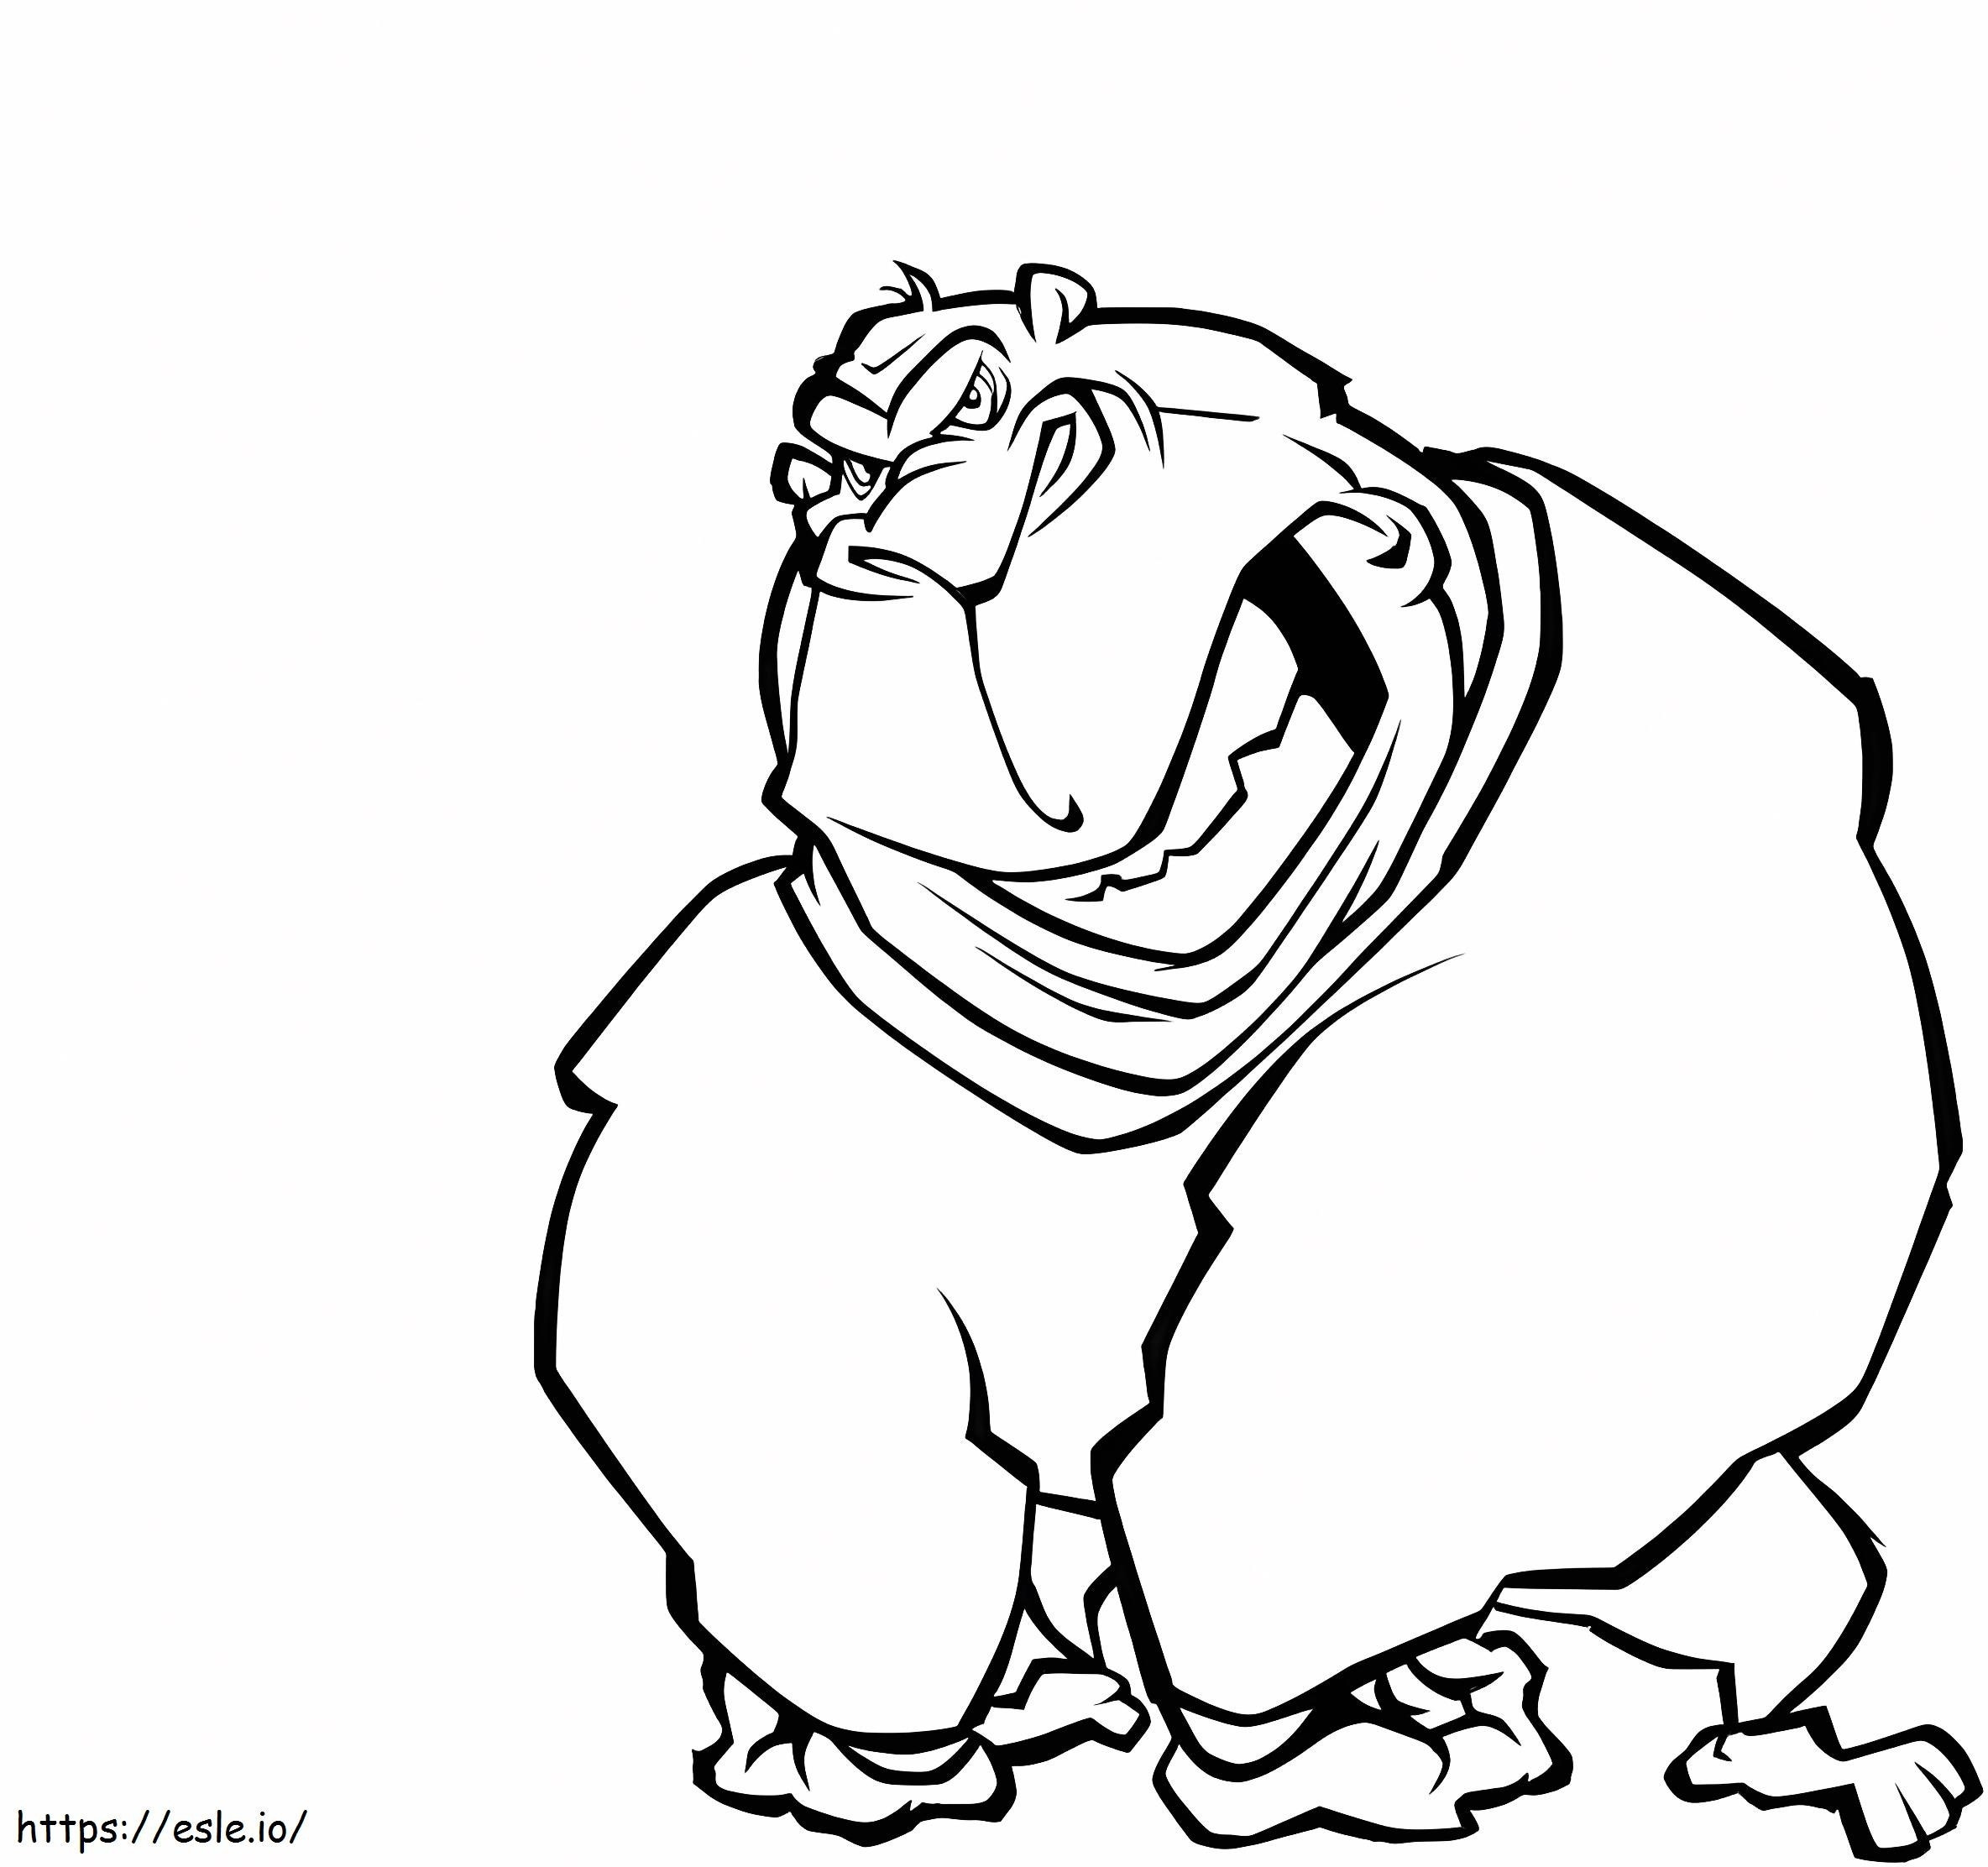 Strong Gorilla coloring page